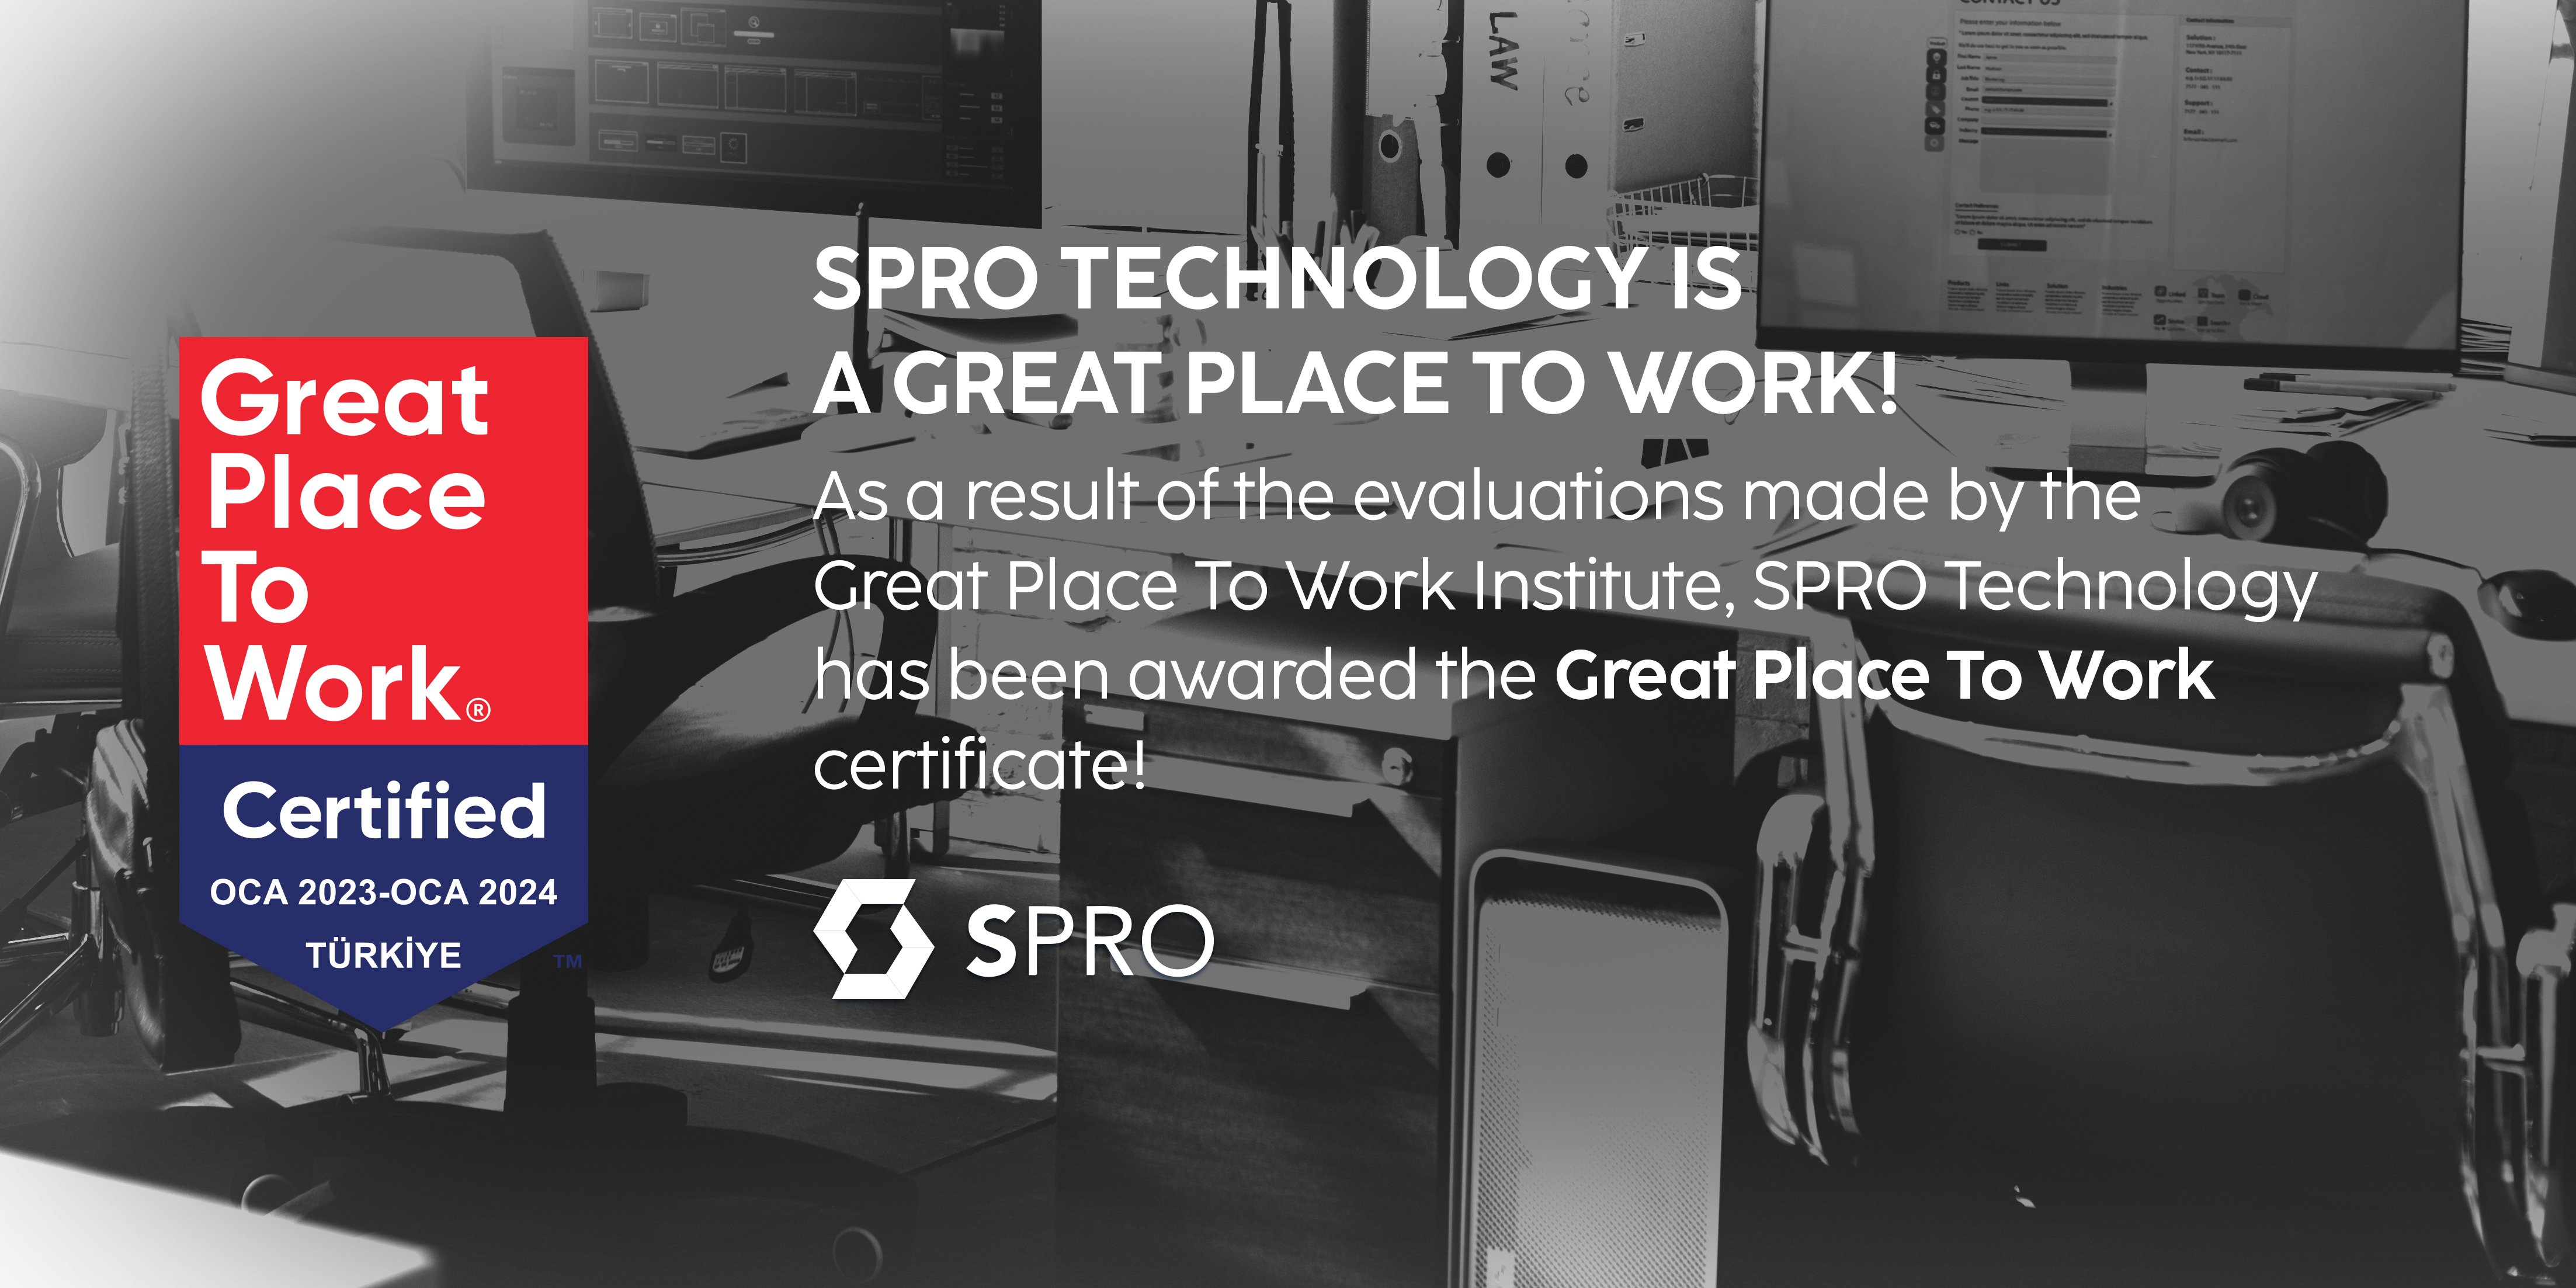  SPRO TECHNOLOGY IS A GREAT PLACE TO WORK! 